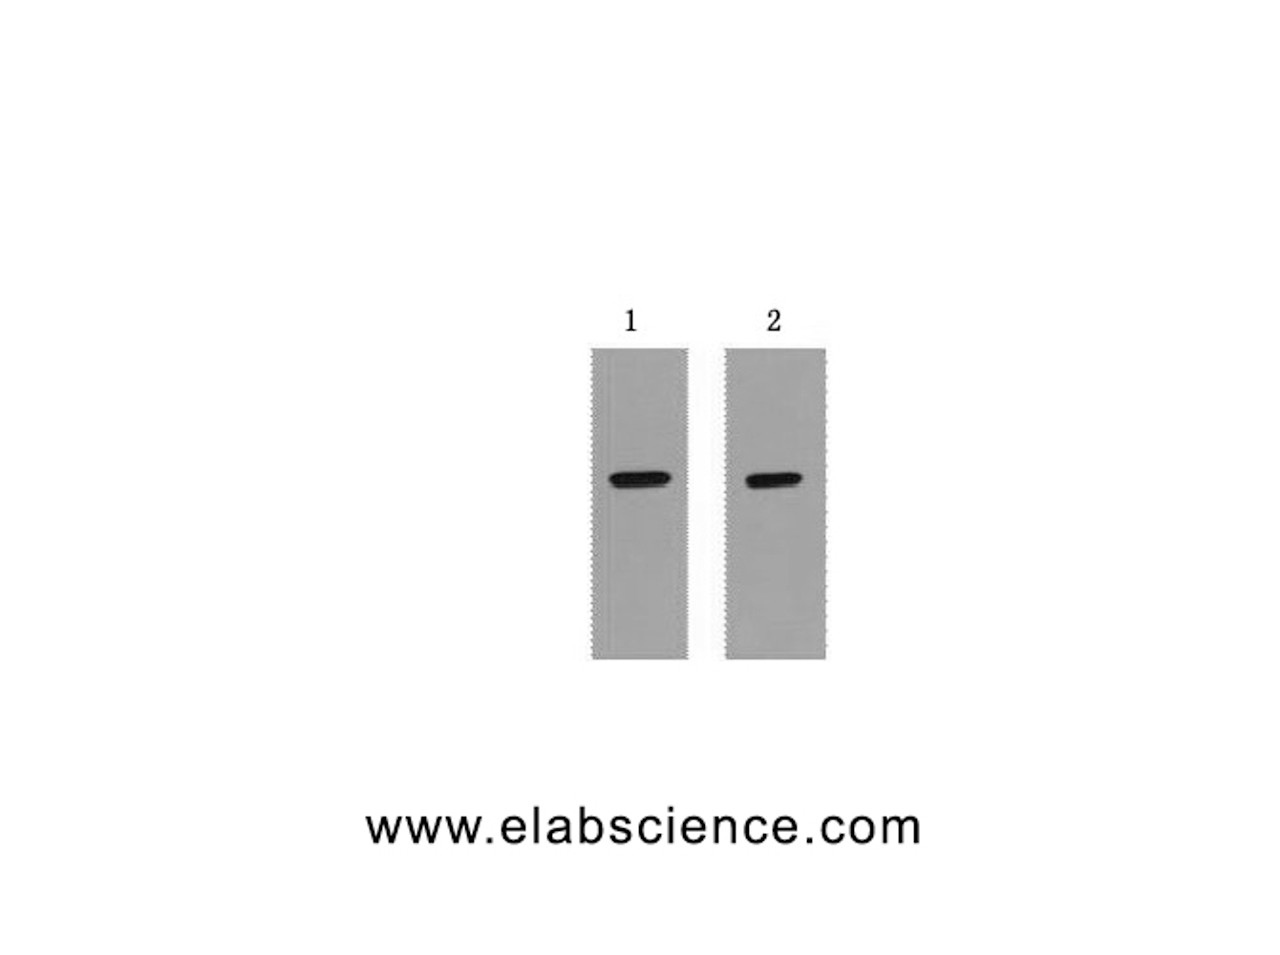 Western Blot analysis of 1ug Strep II fusion protein using Strep-Tag Monoclonal Antibody at dilution of 1) 1:5000 2) 1:10000.